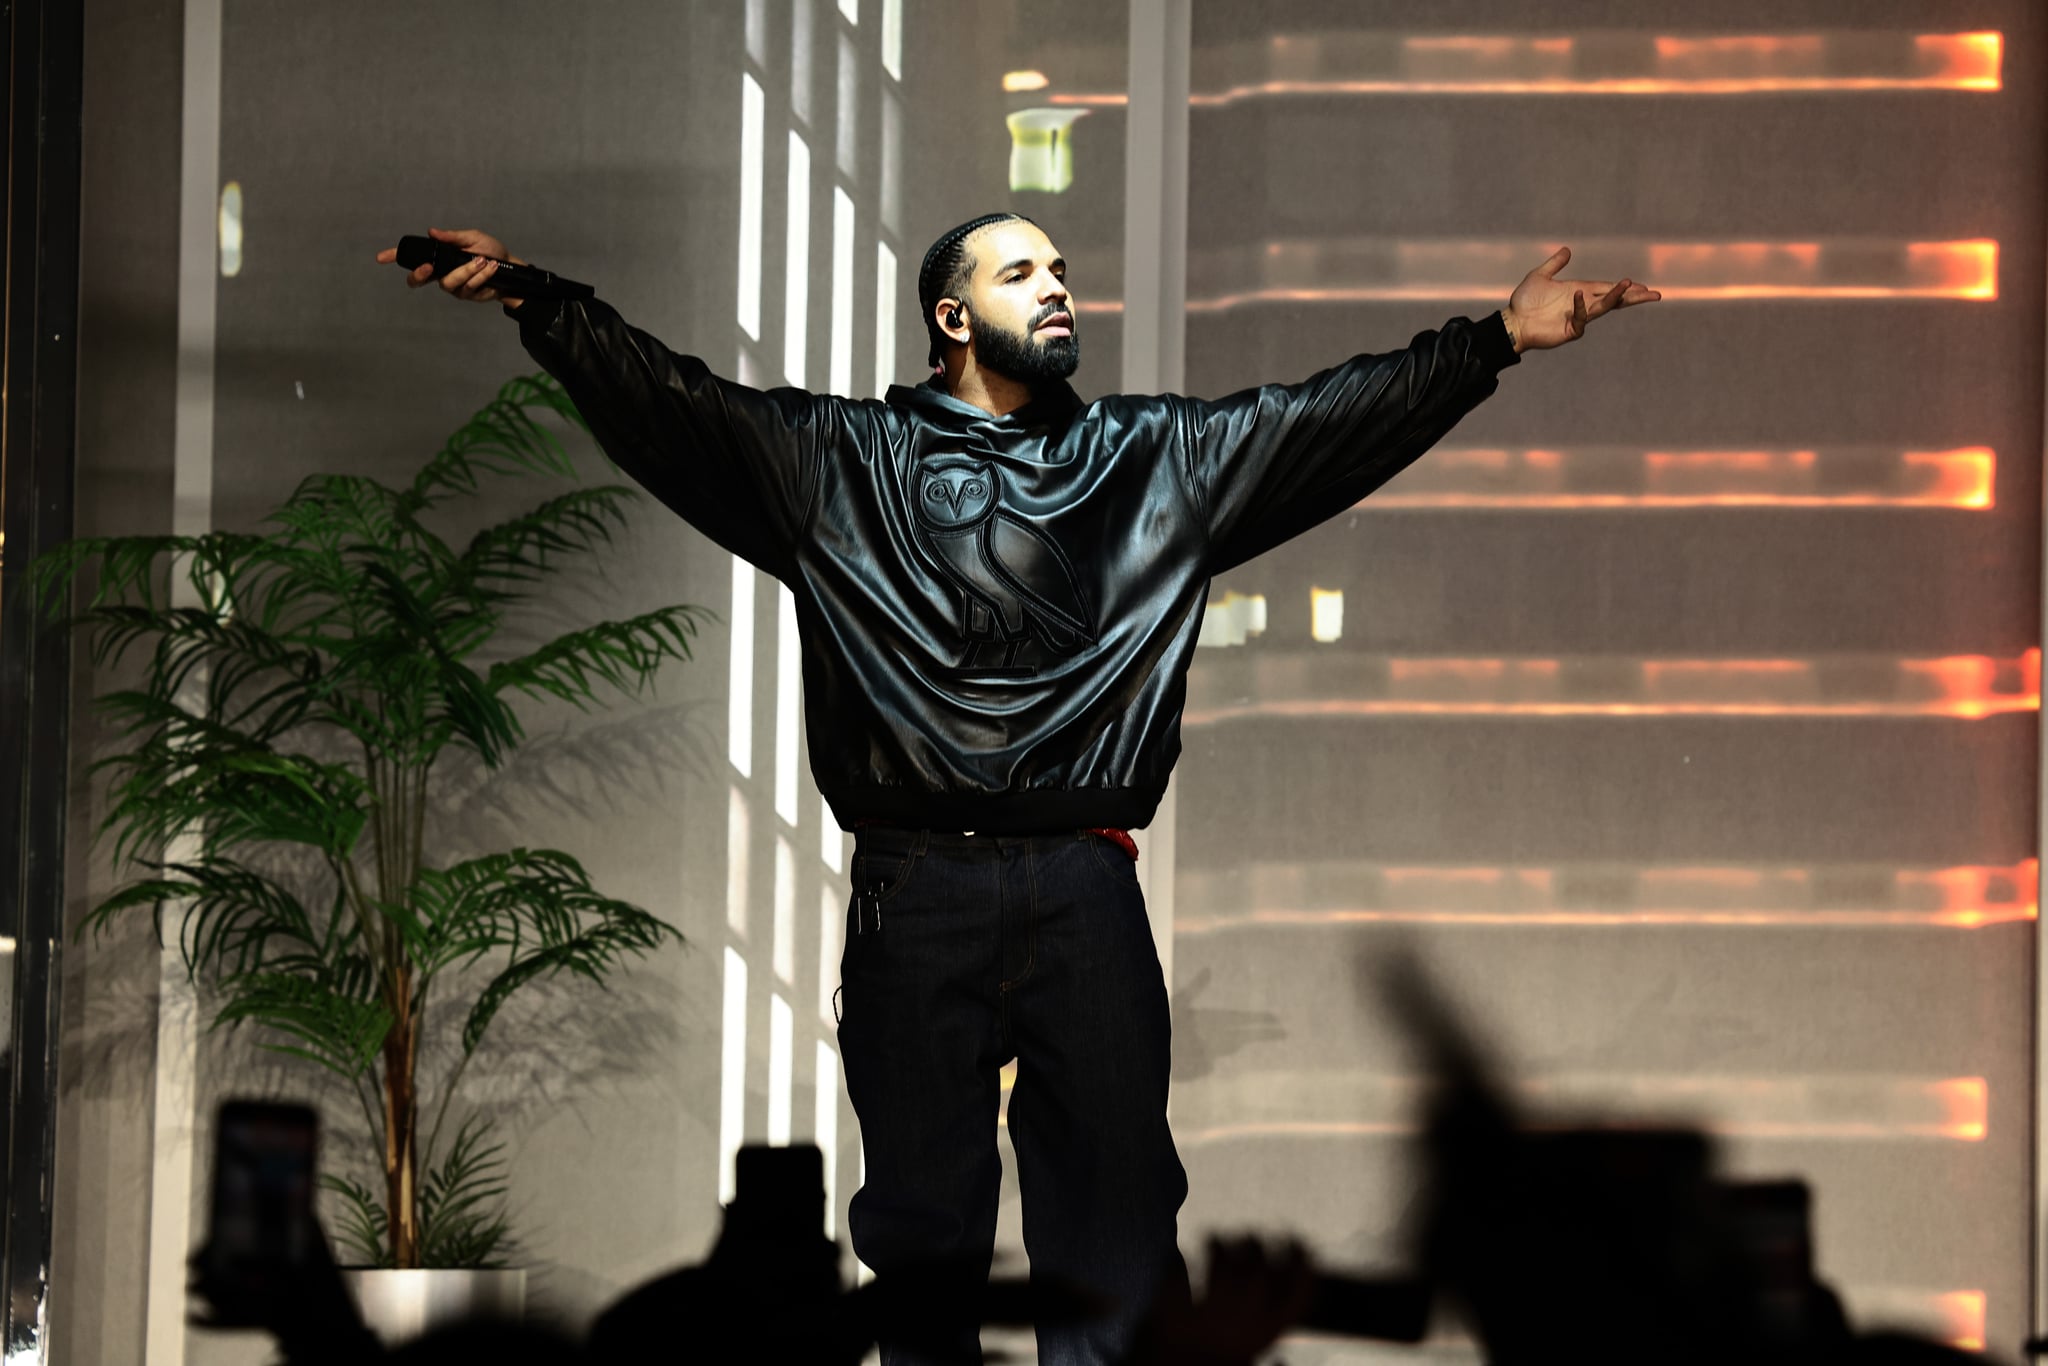 NEW YORK, NEW YORK - JANUARY 22: Drake performs on stage during Drake Live From The Apollo Theater For SiriusXM and Sound 42 at The Apollo Theater on January 22, 2023 in New York City. (Photo by Dimitrios Kambouris/Getty Images for SiriusXM)